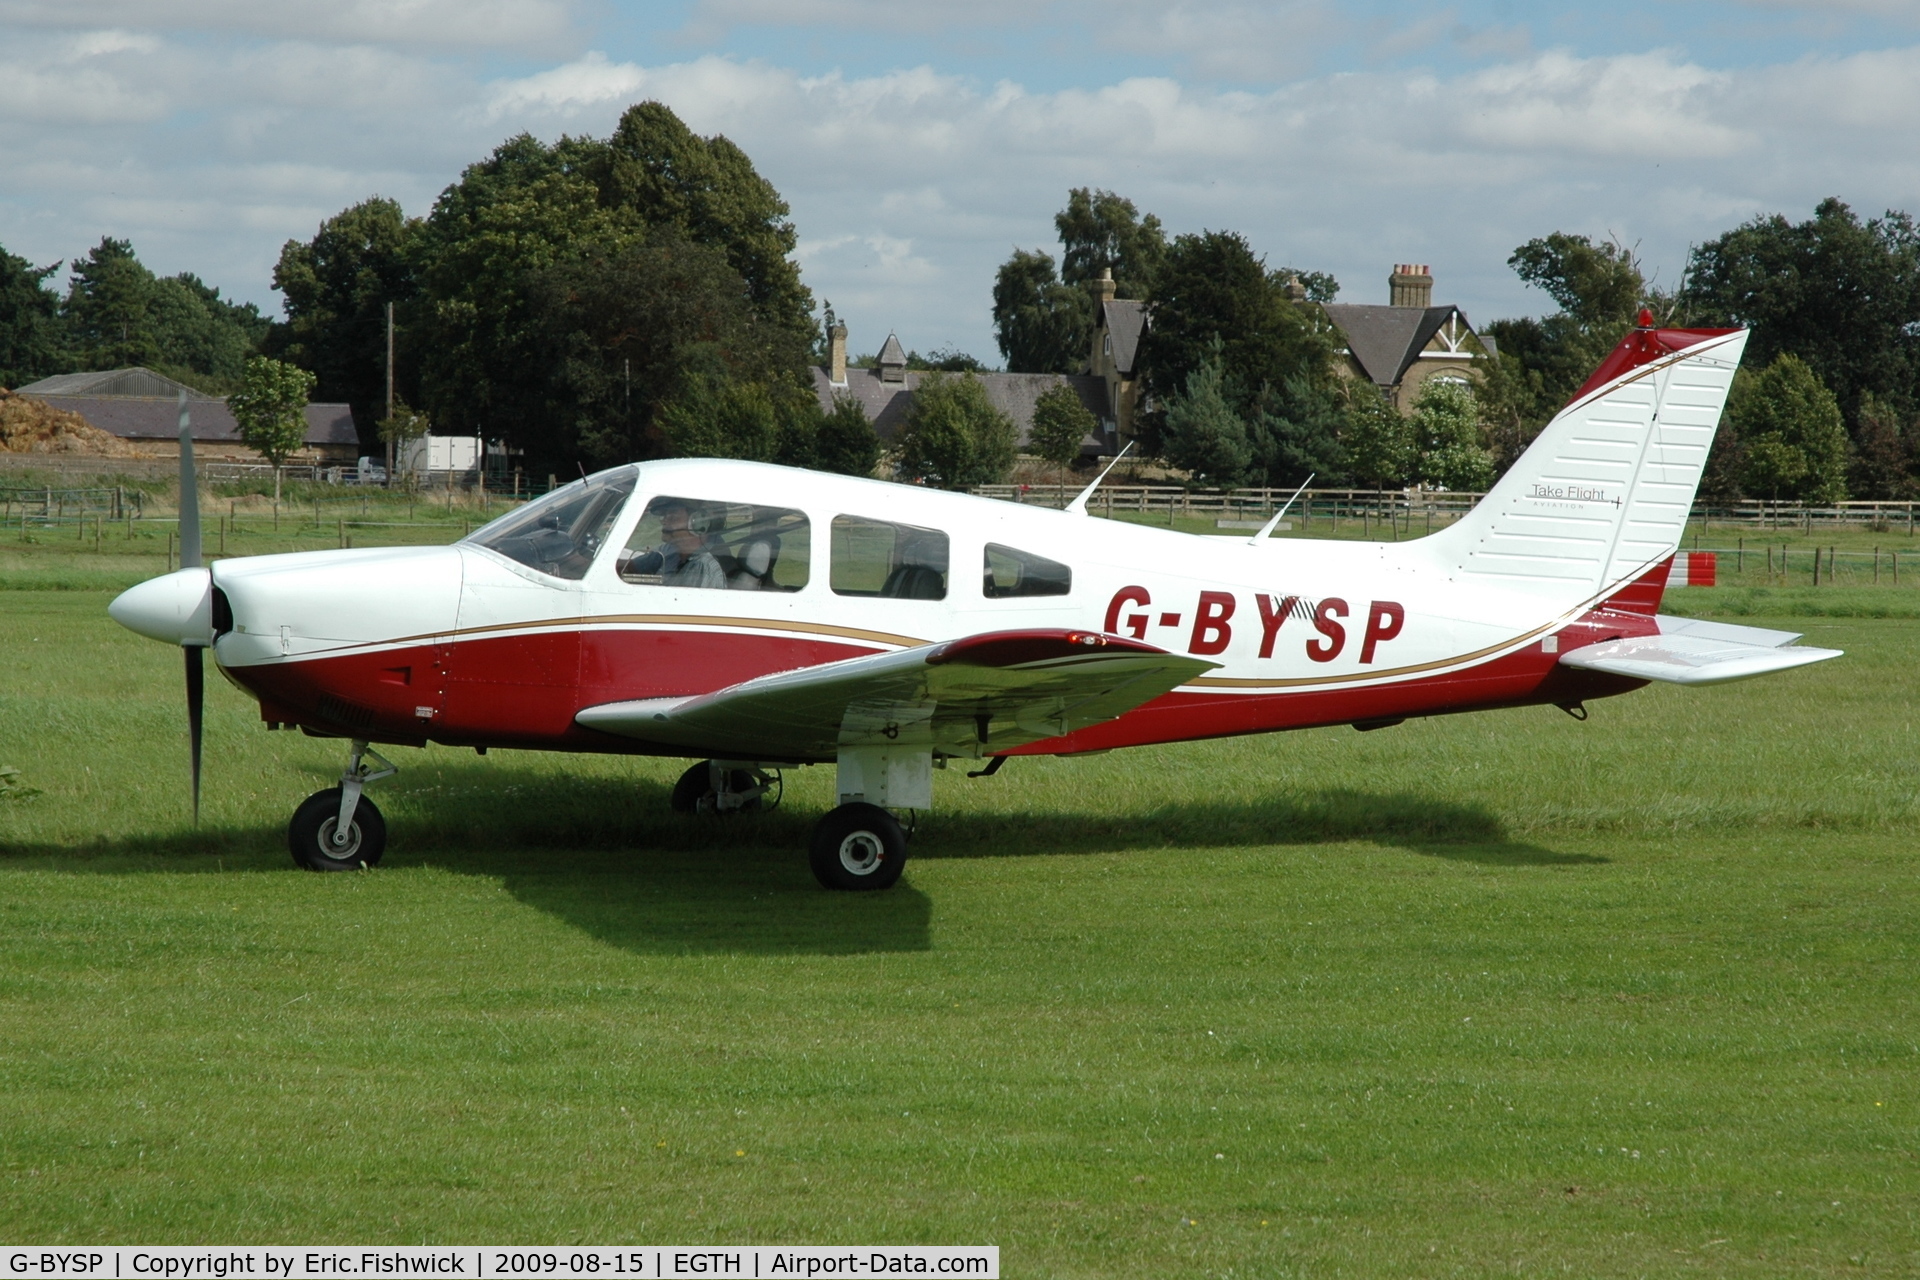 G-BYSP, 1985 Piper PA-28-181 Cherokee Archer II C/N 28-8590047, 1. G-BYSP at Shuttleworth Collection Evening Air Display Aug 09